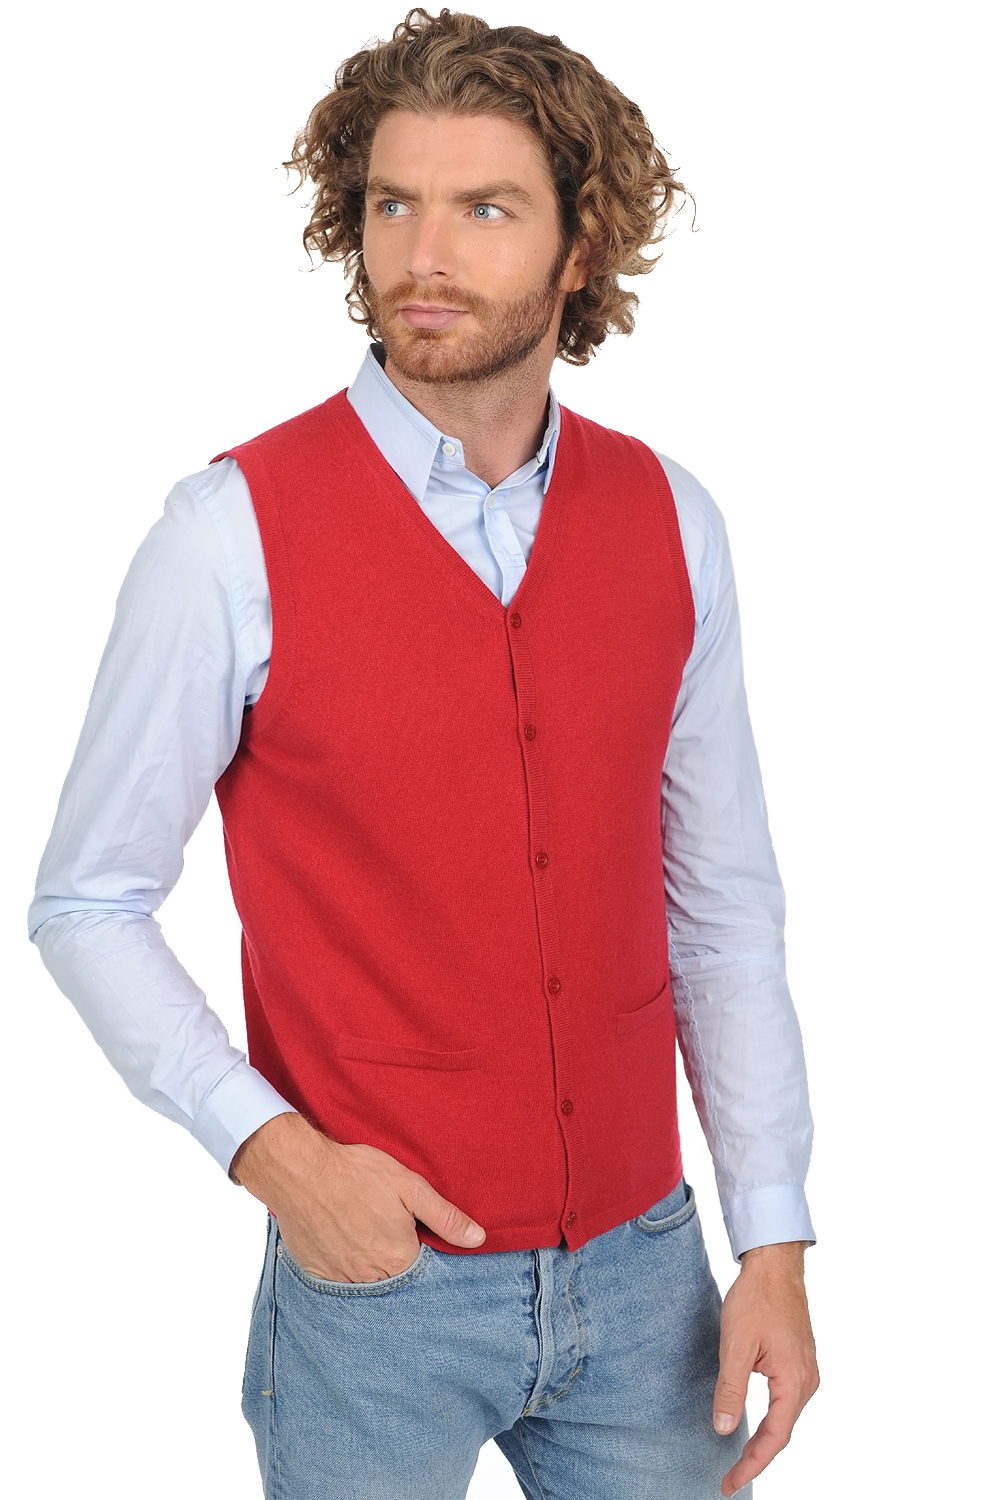 Cashmere men timeless classics basile blood red s